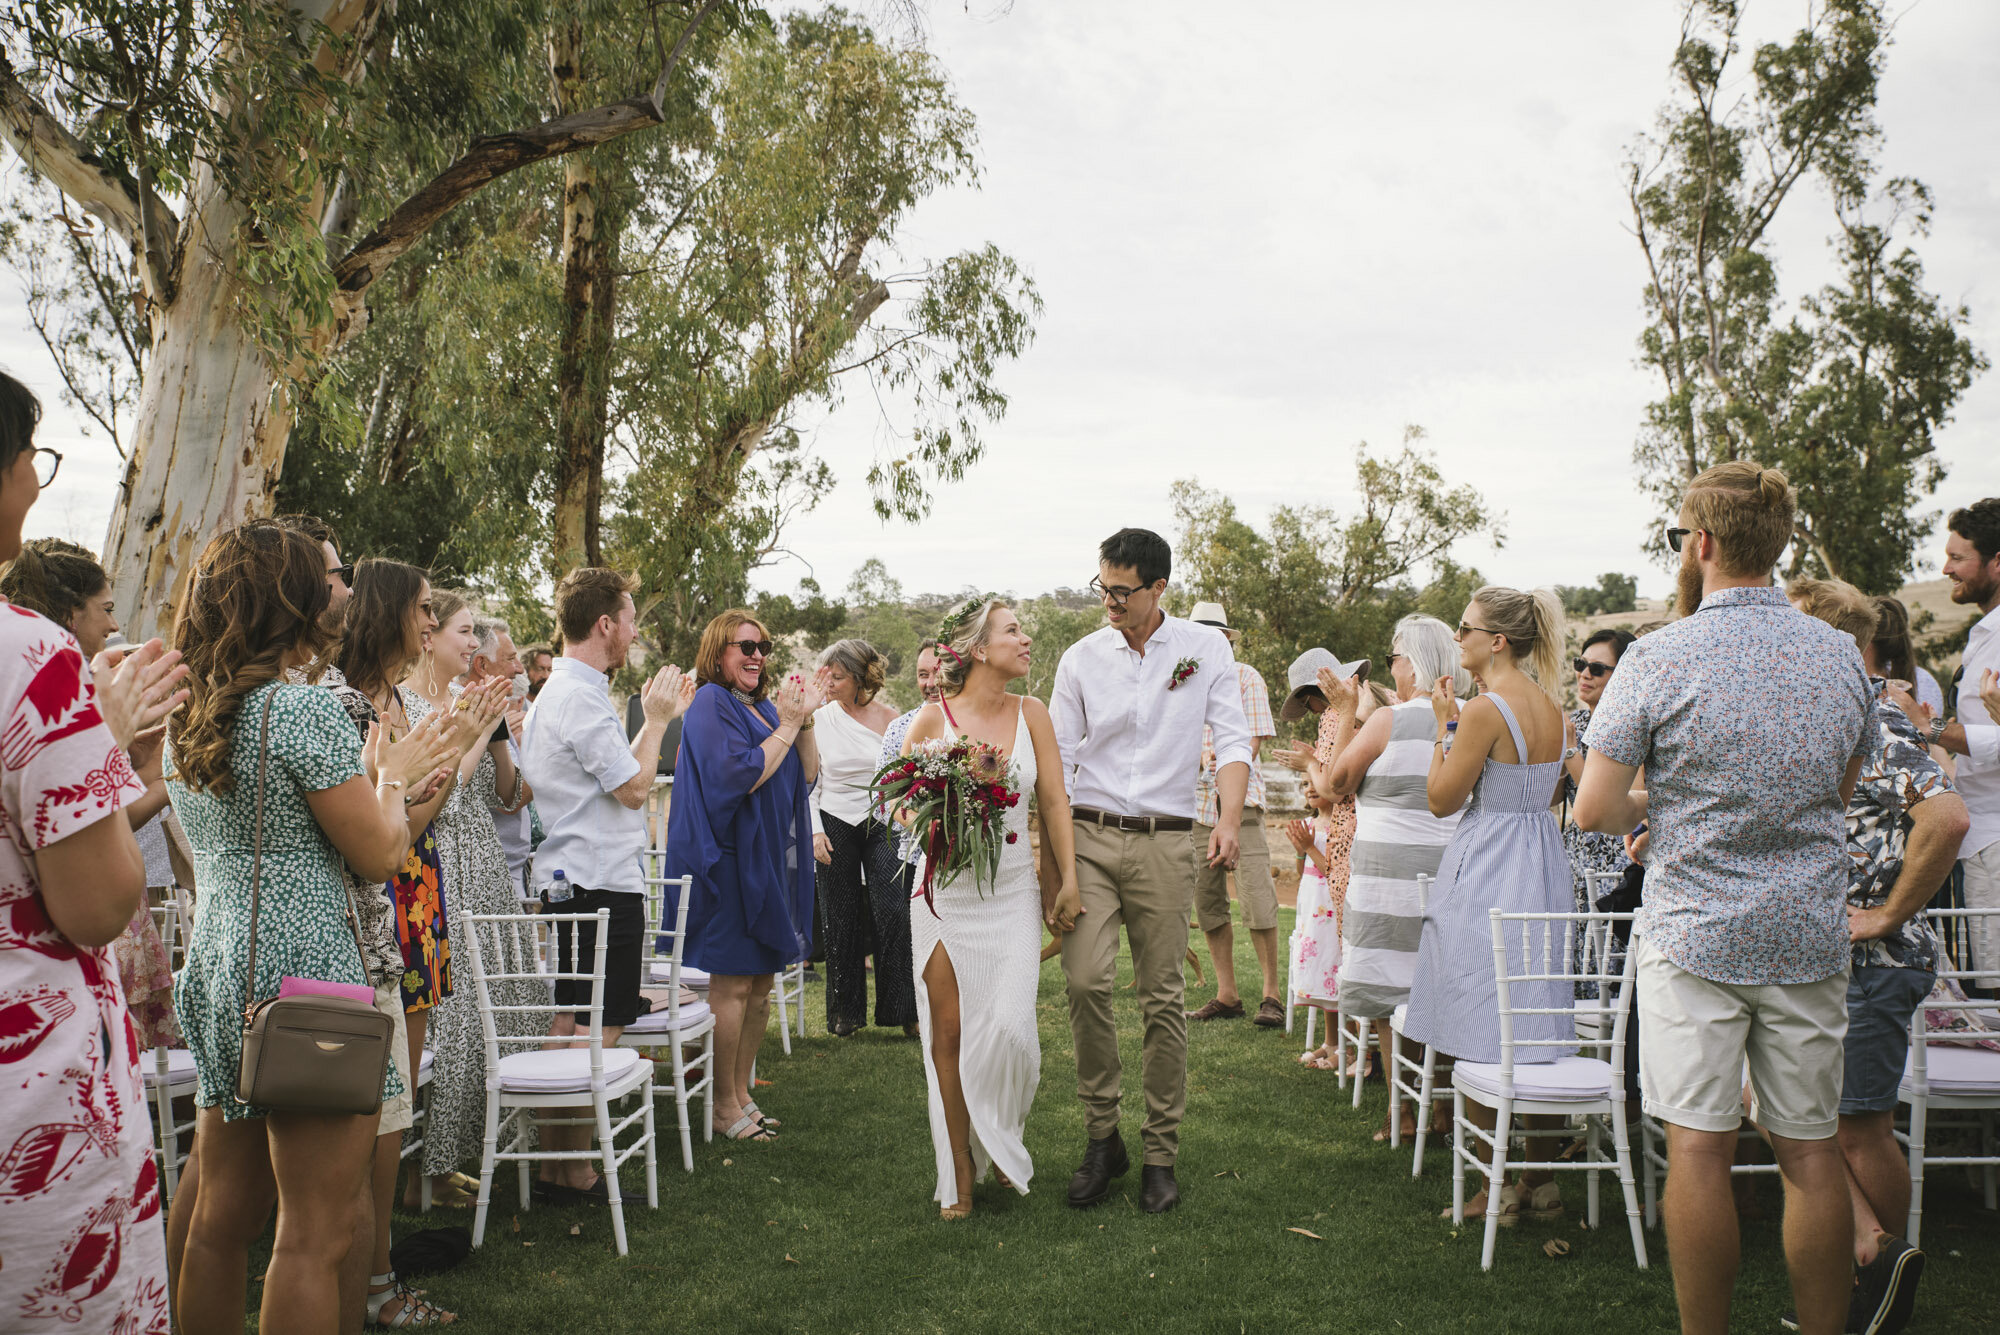 Angie-Roe-Photography-Wedding-Buckland-Northam-Wheatbelt-Rustic-Rural-Country (16).jpg